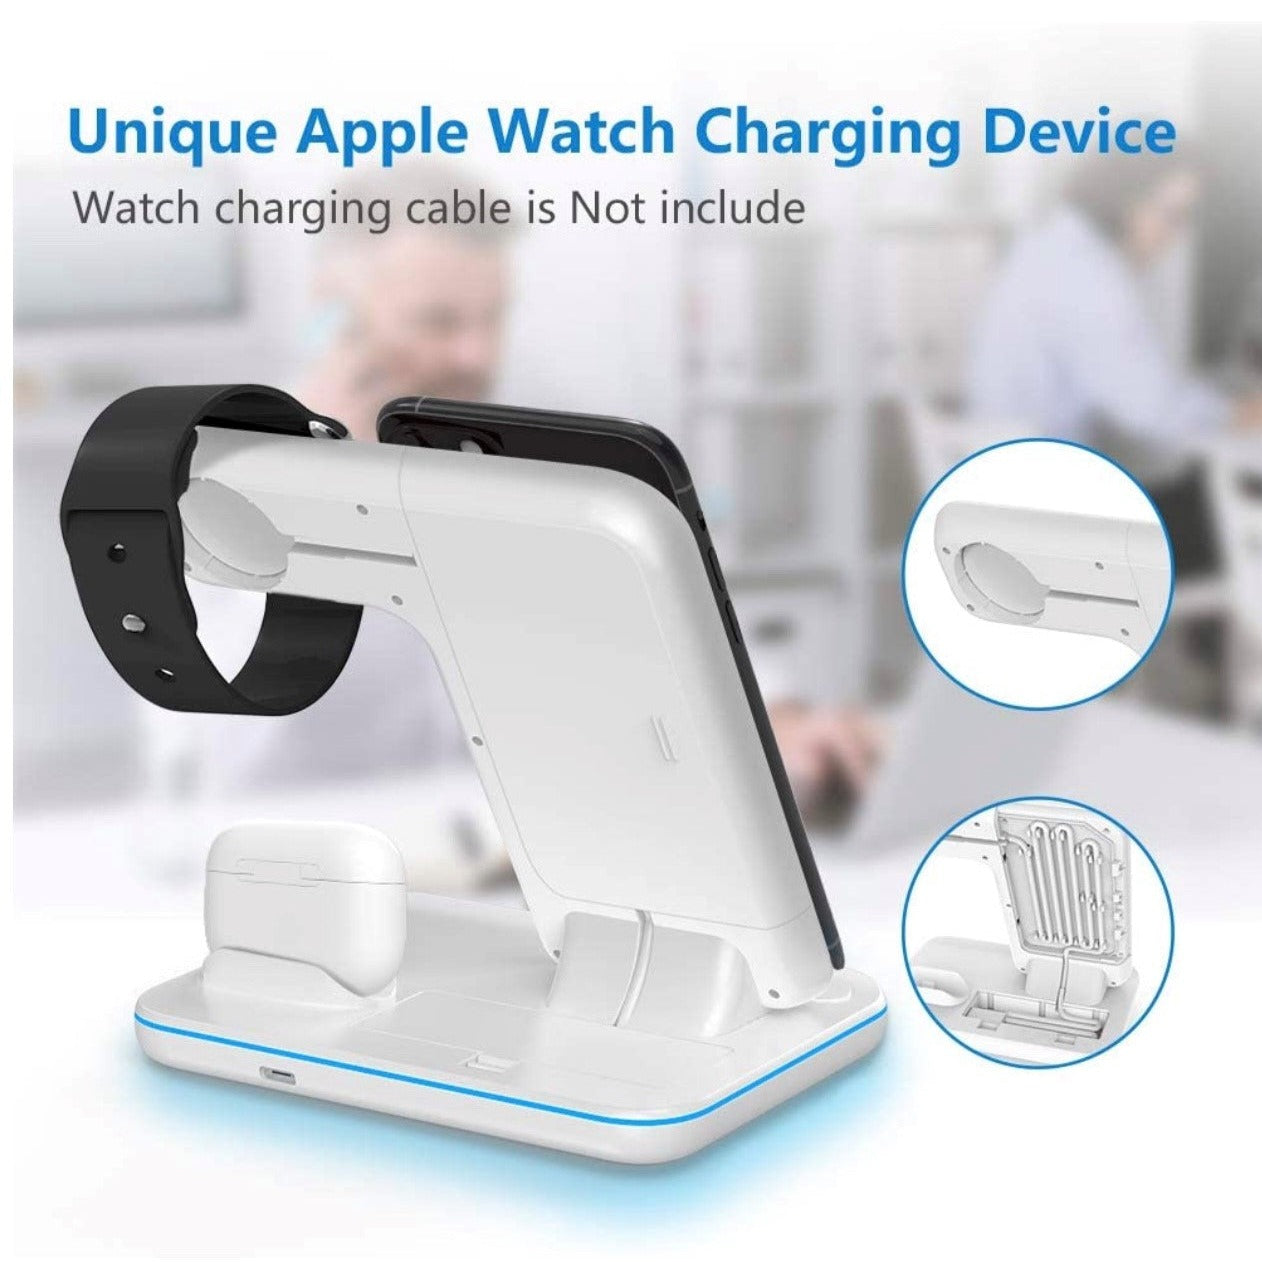 3 in 1 Wireless Charging Dock Station - White